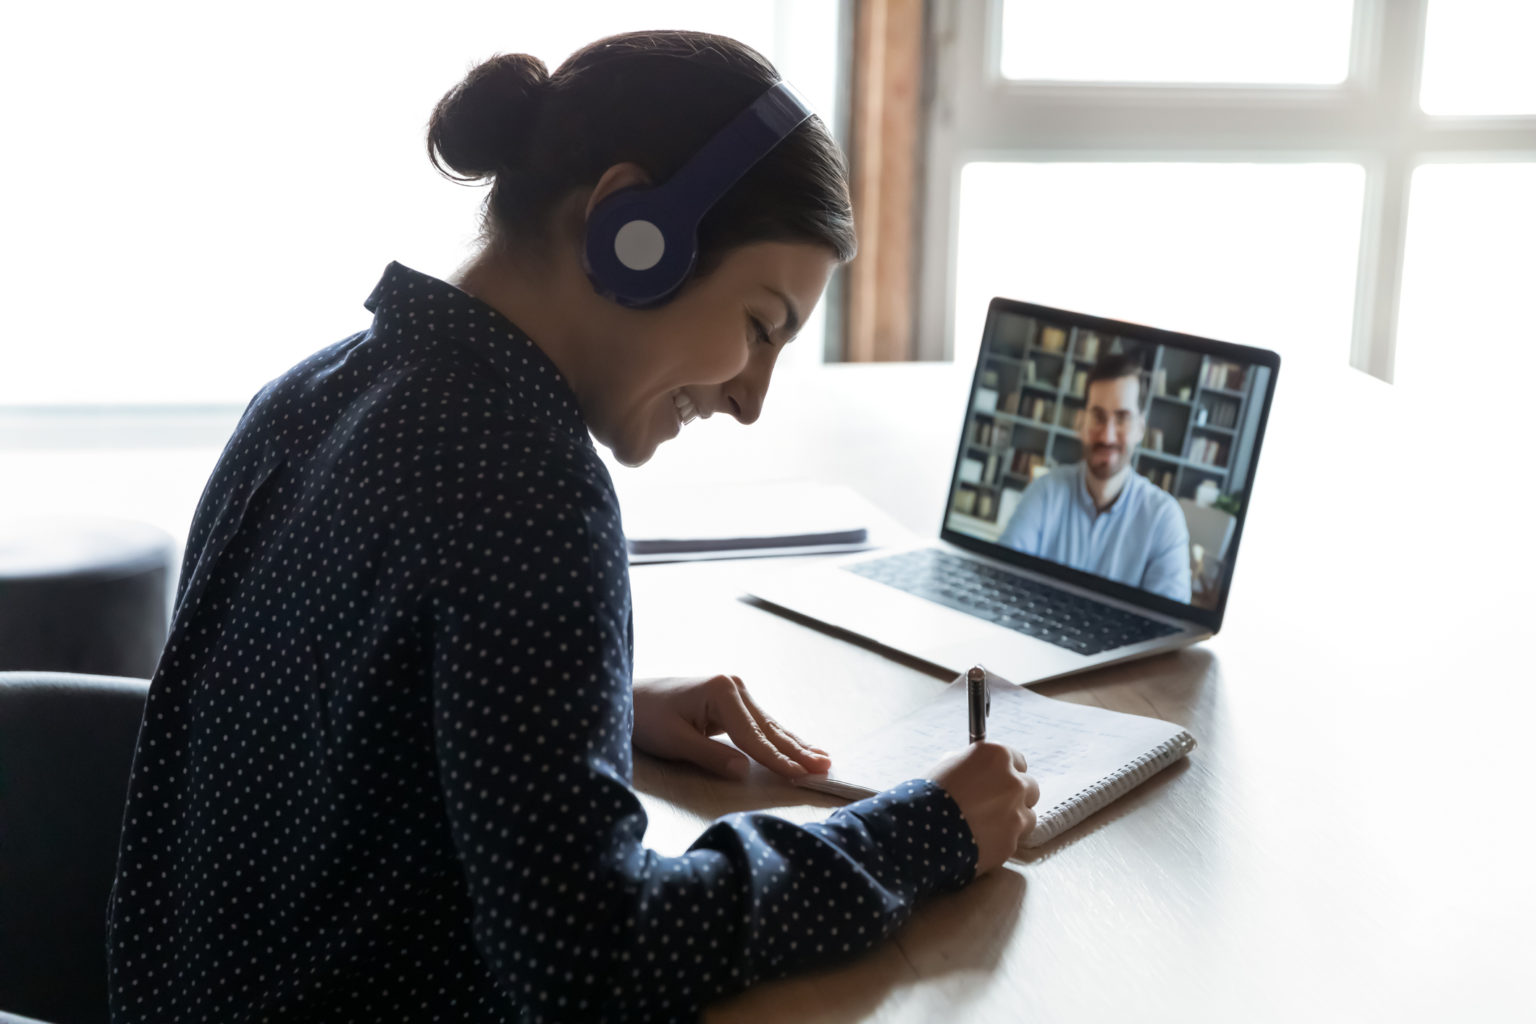 Smiling young indian woman in headphones learning practicing foreign language with confident male tutor distantly on computer. Happy mixed race girl listening to educational webinar, writing notes.